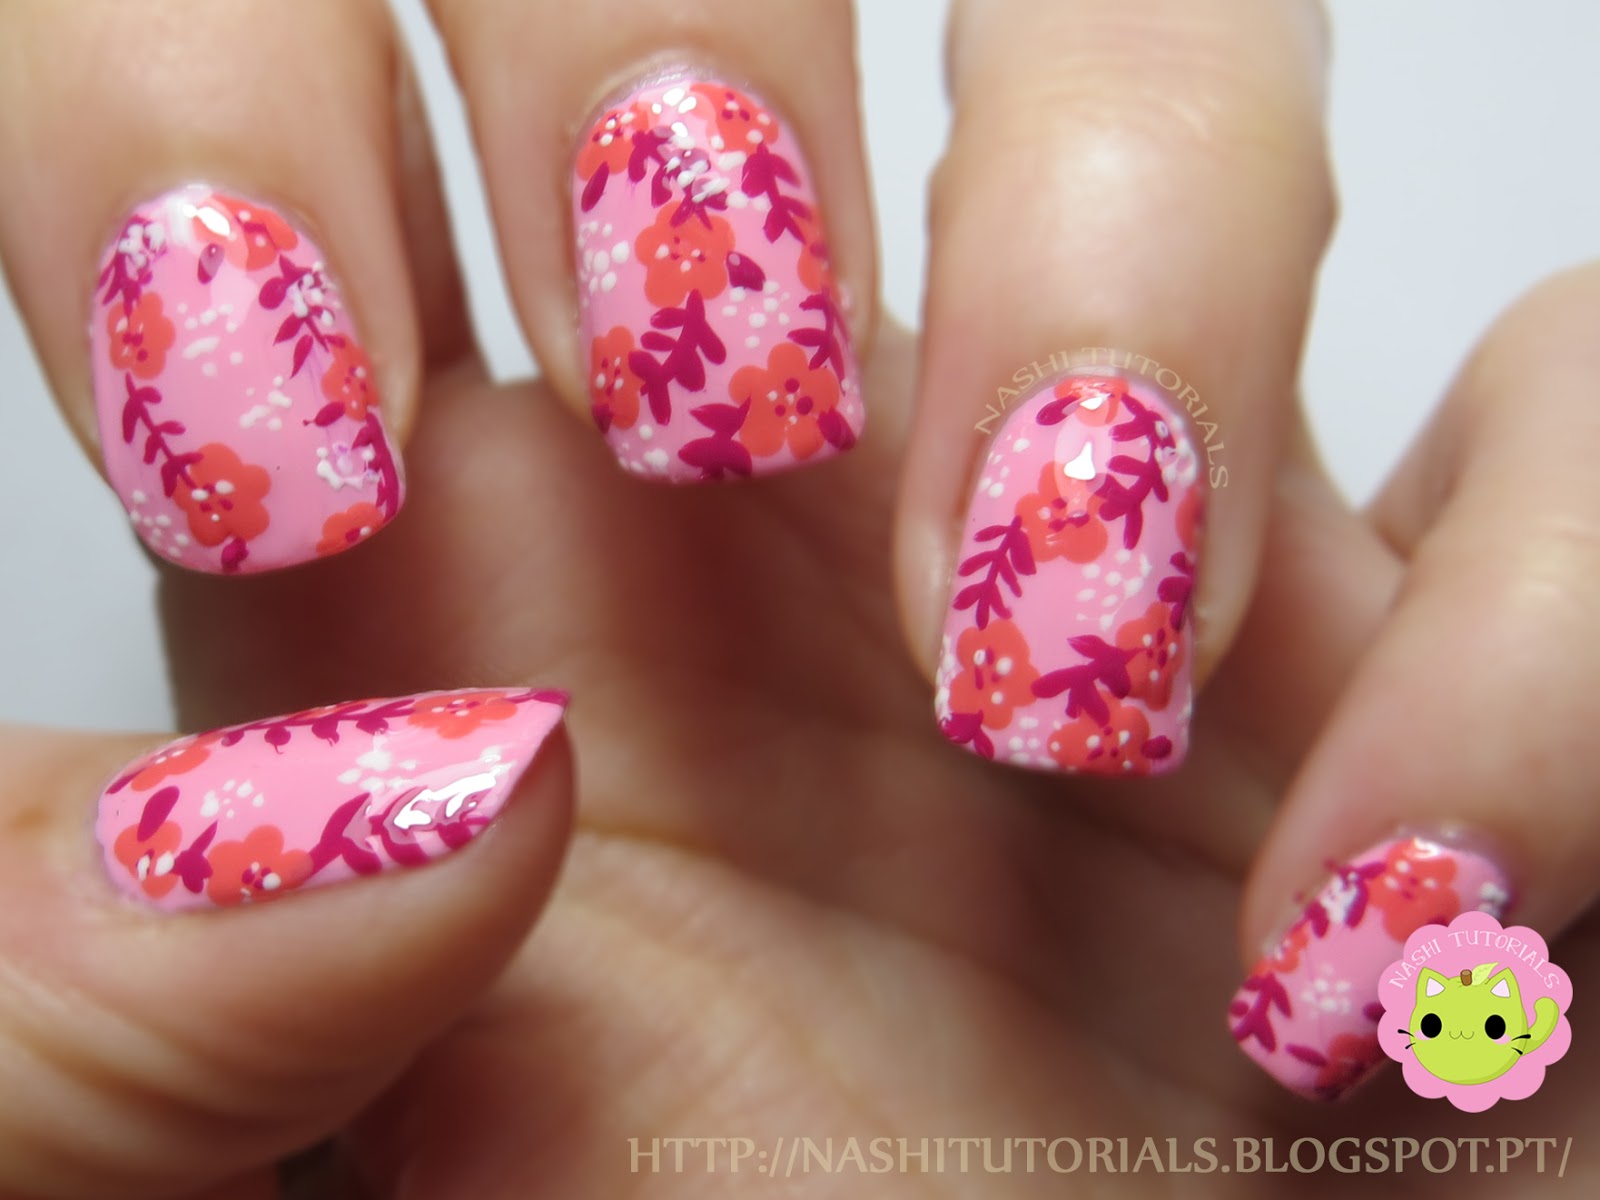 8. "Pink and Black Floral Nail Art Tutorial" - wide 6